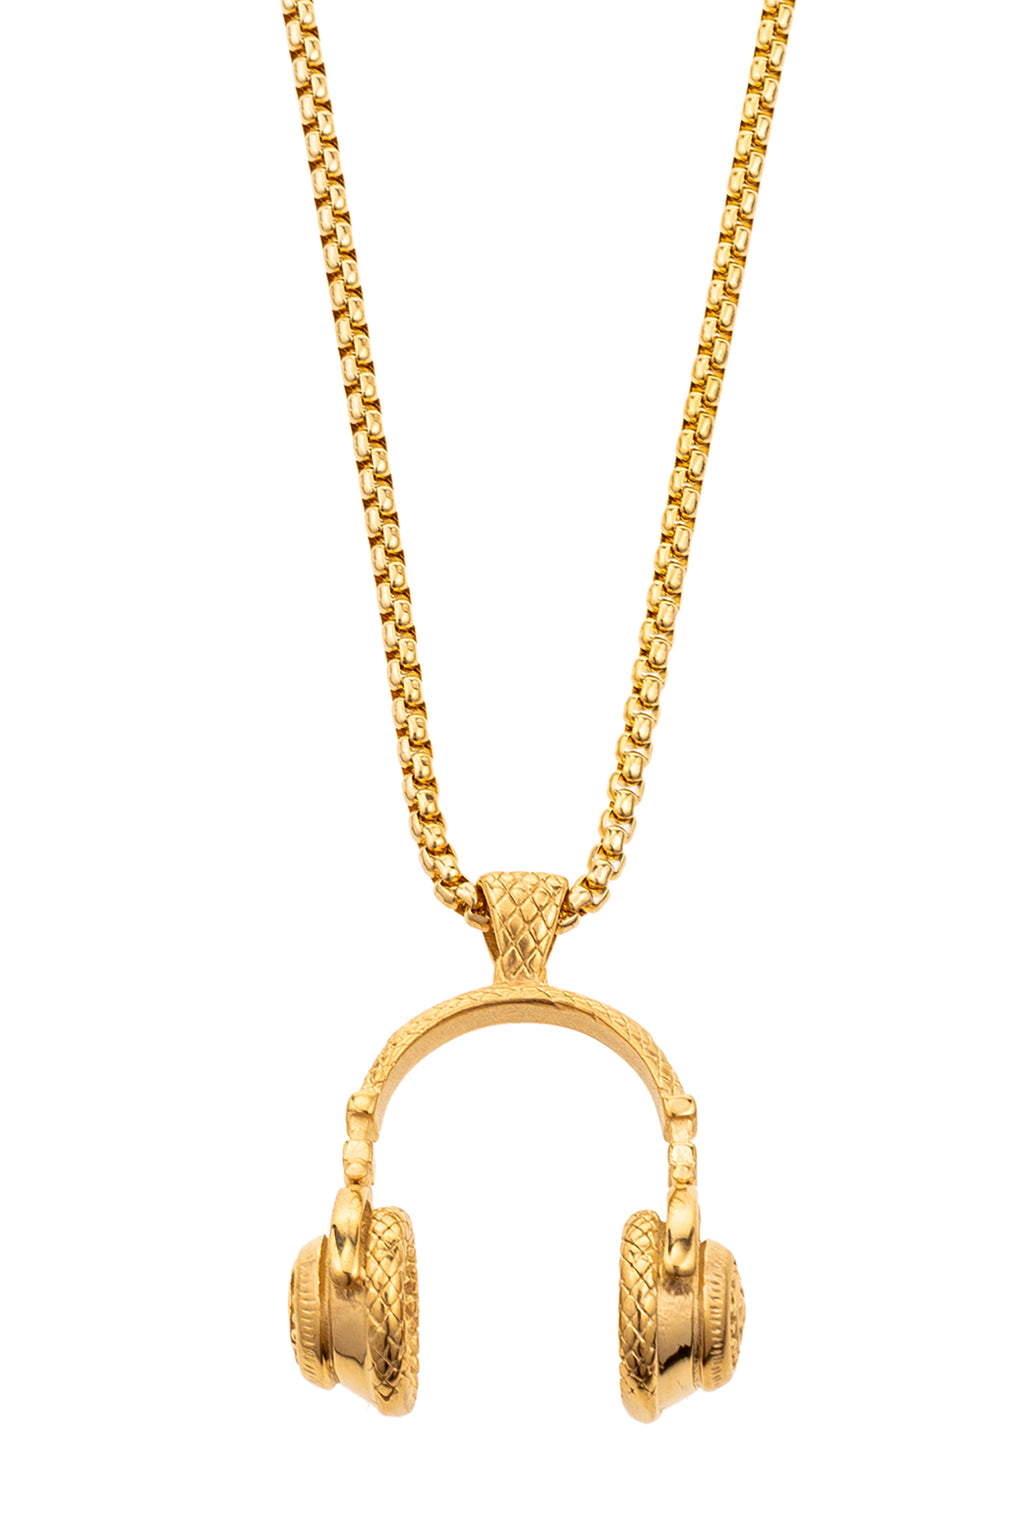 Small gold chain necklace with 1 inch pendant. Pendant is gold pair of old school headphones.